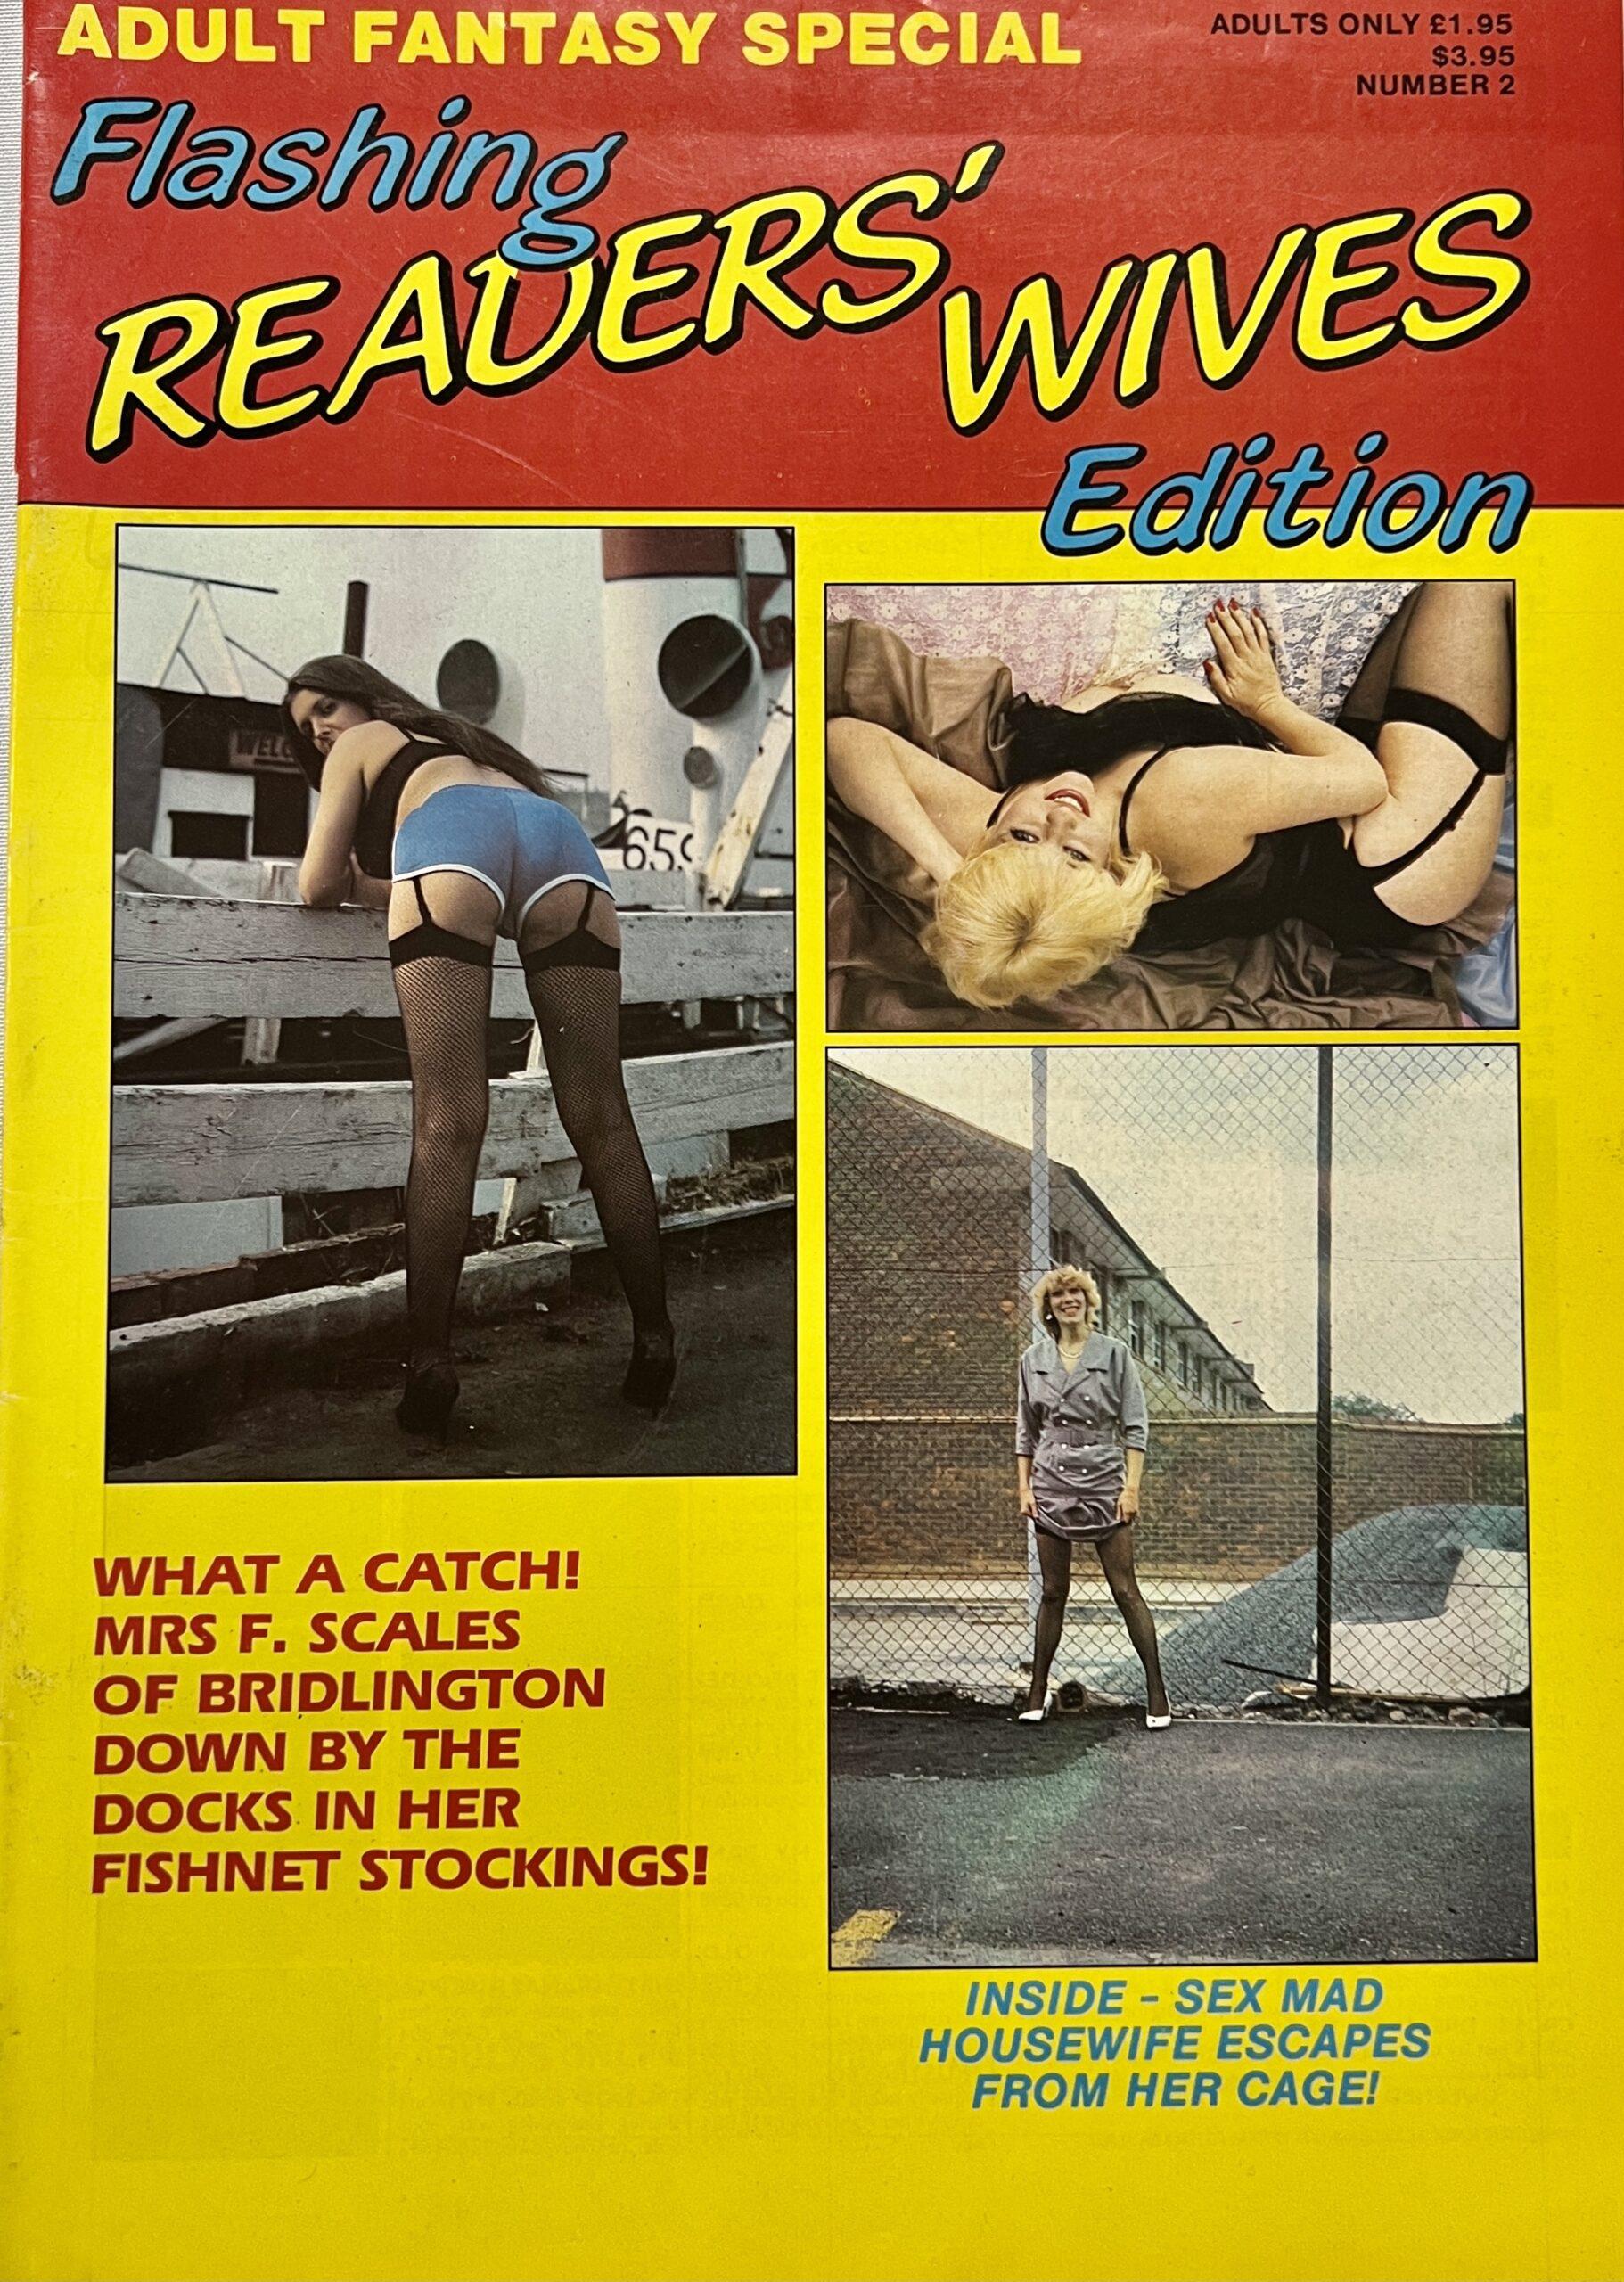 Flashing Readers Wives Edition Adult Fantasy Special #2 80S UK Magazine